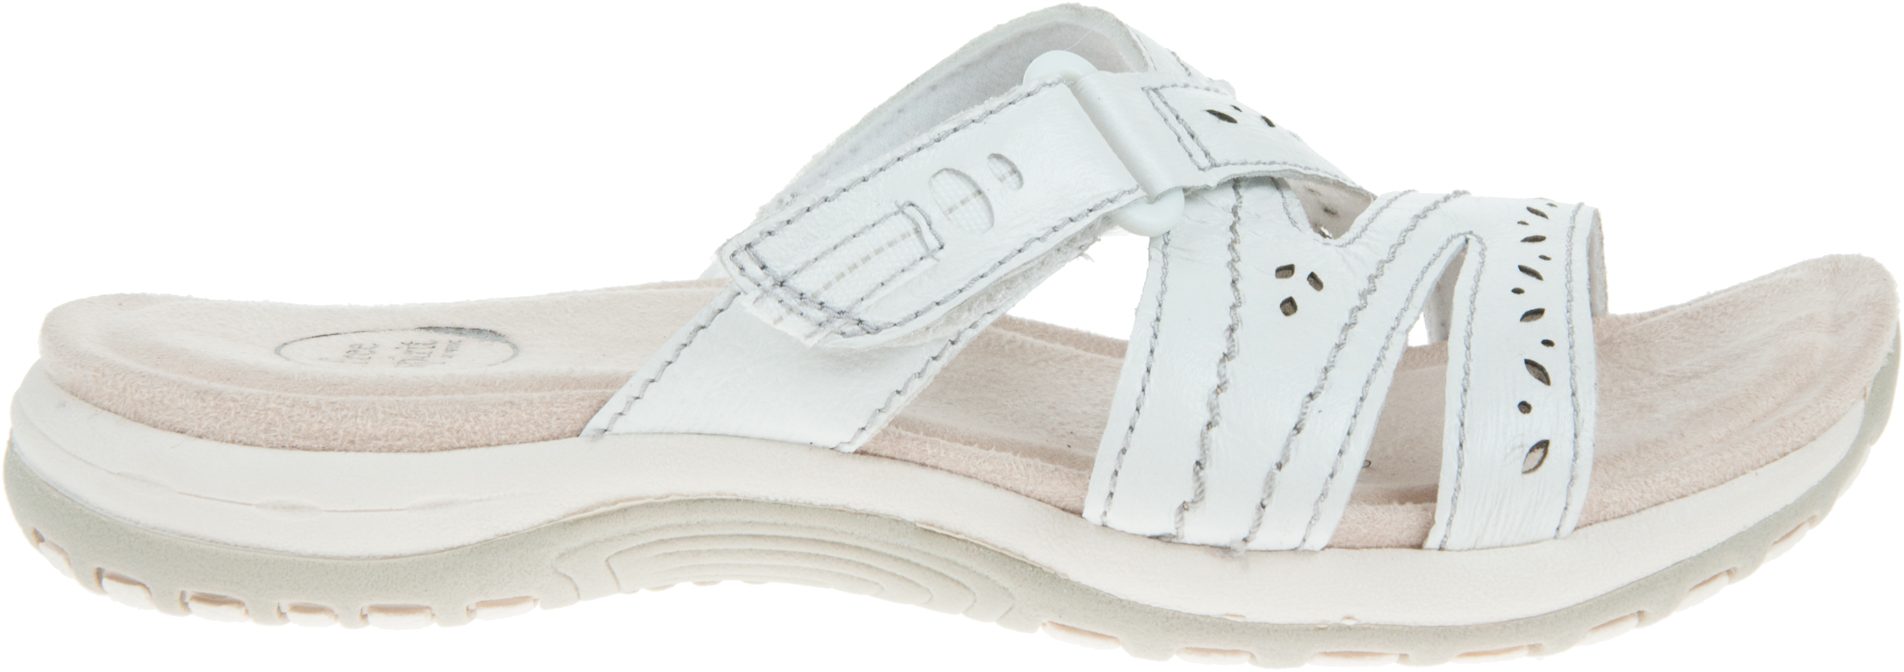 Free Spirit Albany White 40582 - Mule Sandals - Humphries Shoes